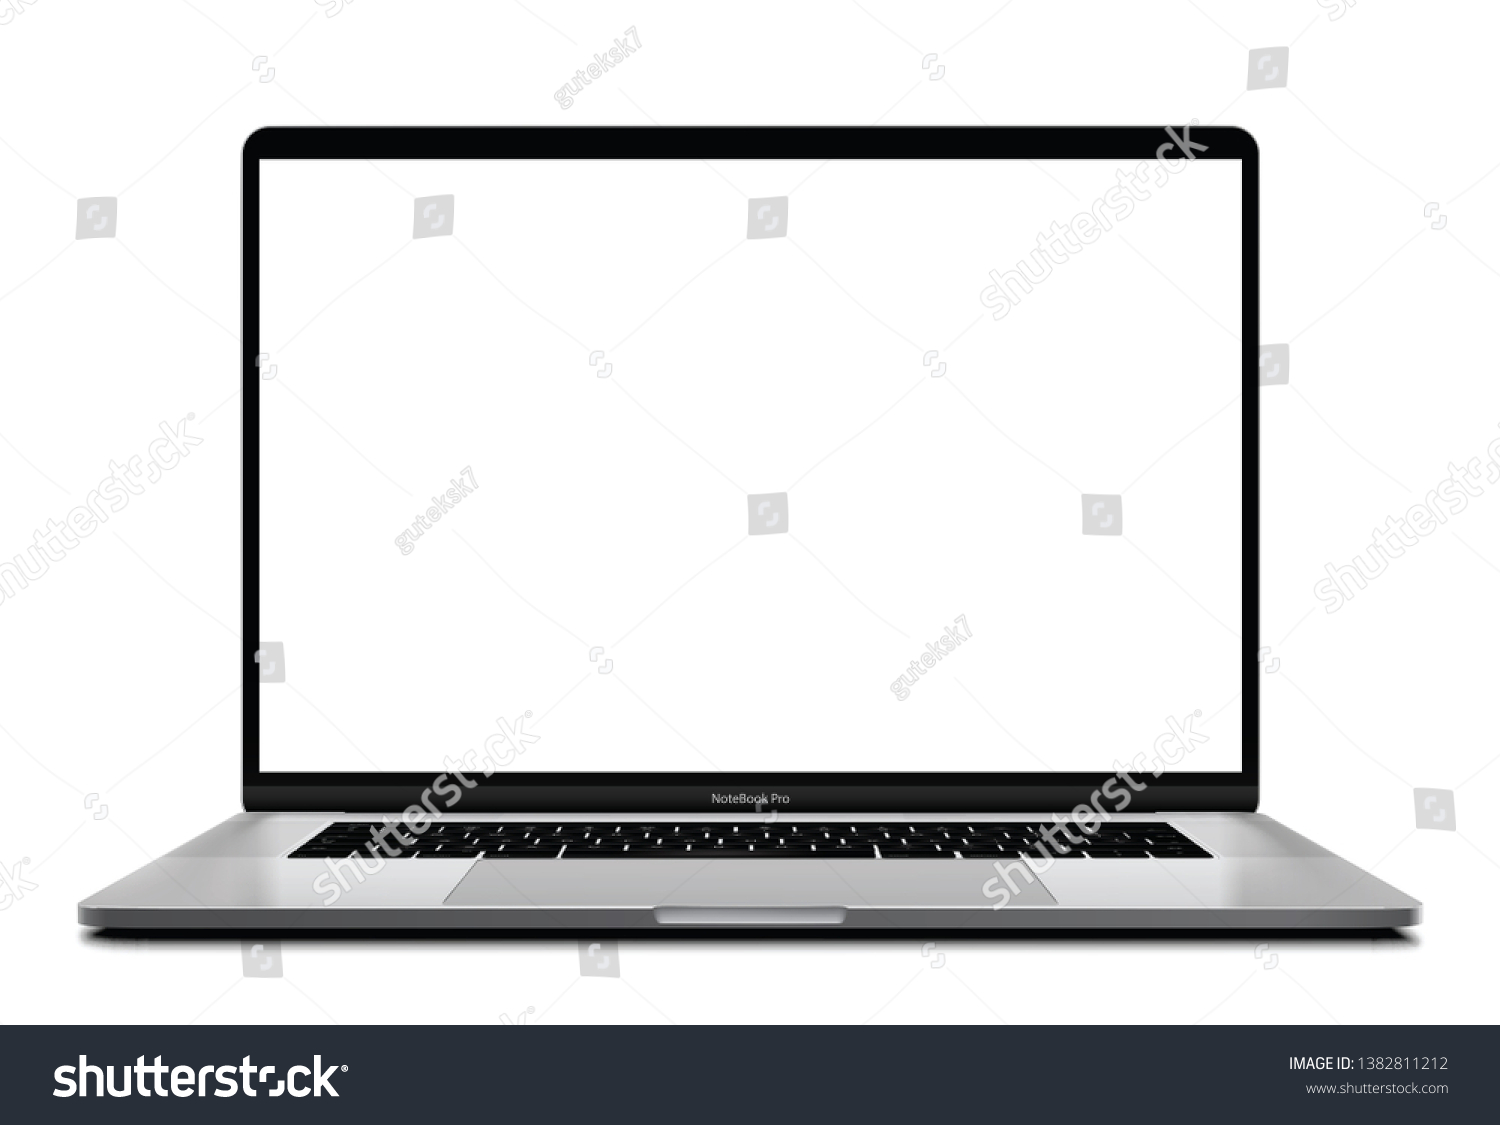 Laptop Blank Screen Silver Color Isolated Stock Vector Royalty Free 1382811212 Shutterstock 1940